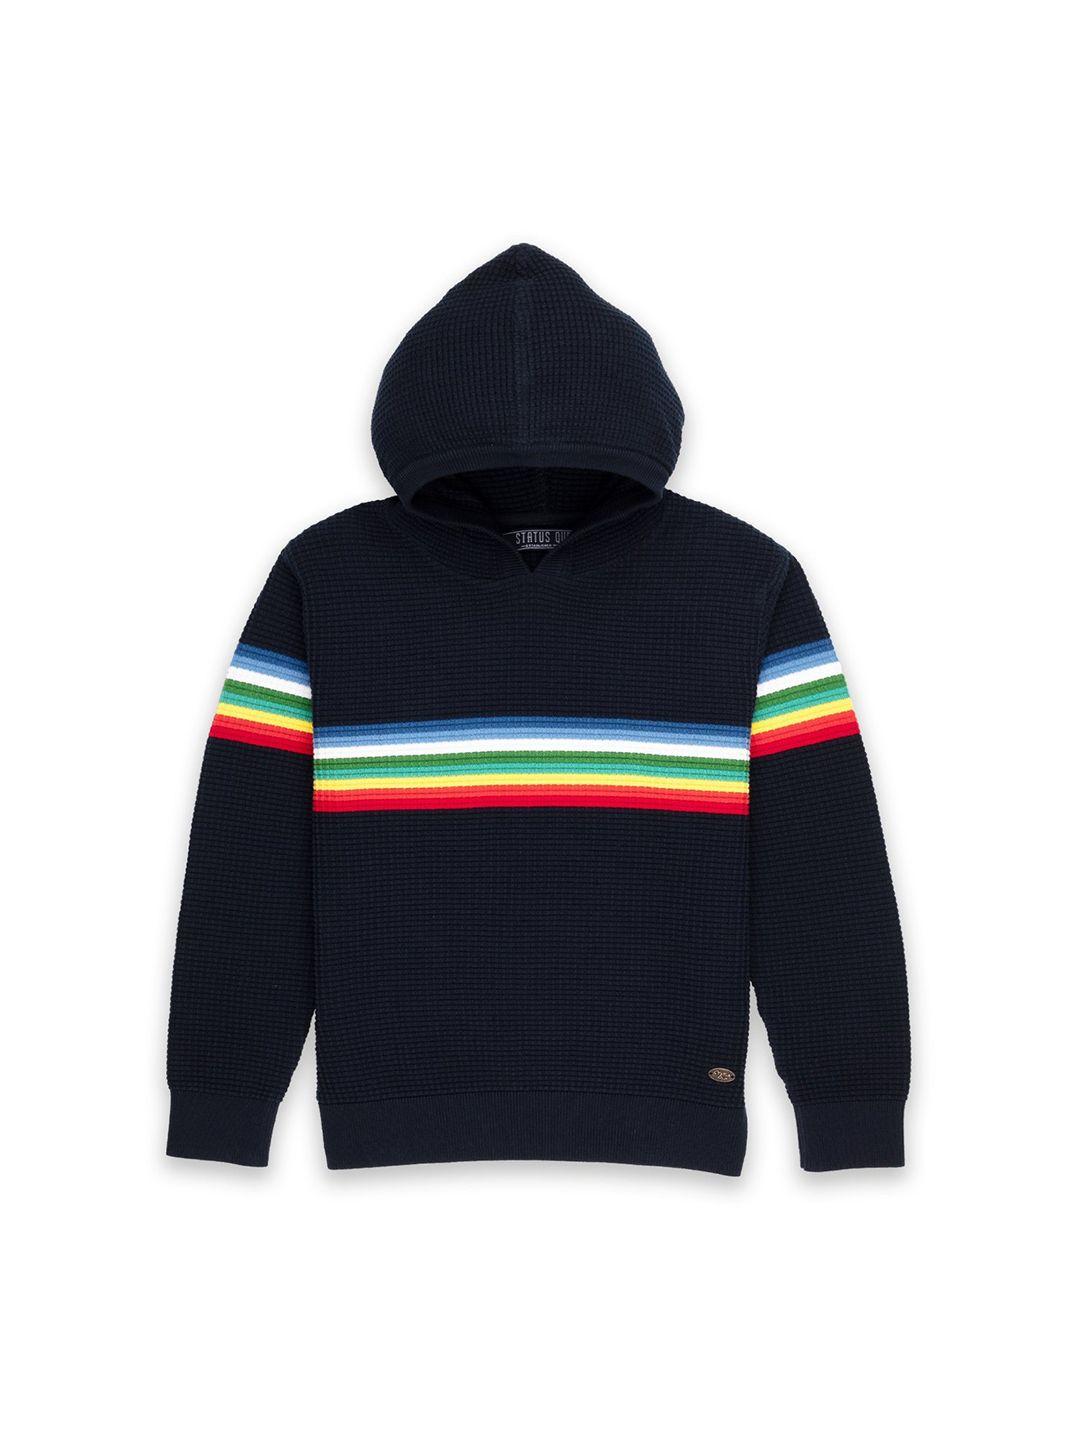 status-quo-boys-navy-blue-striped-cotton-hooded-pullover